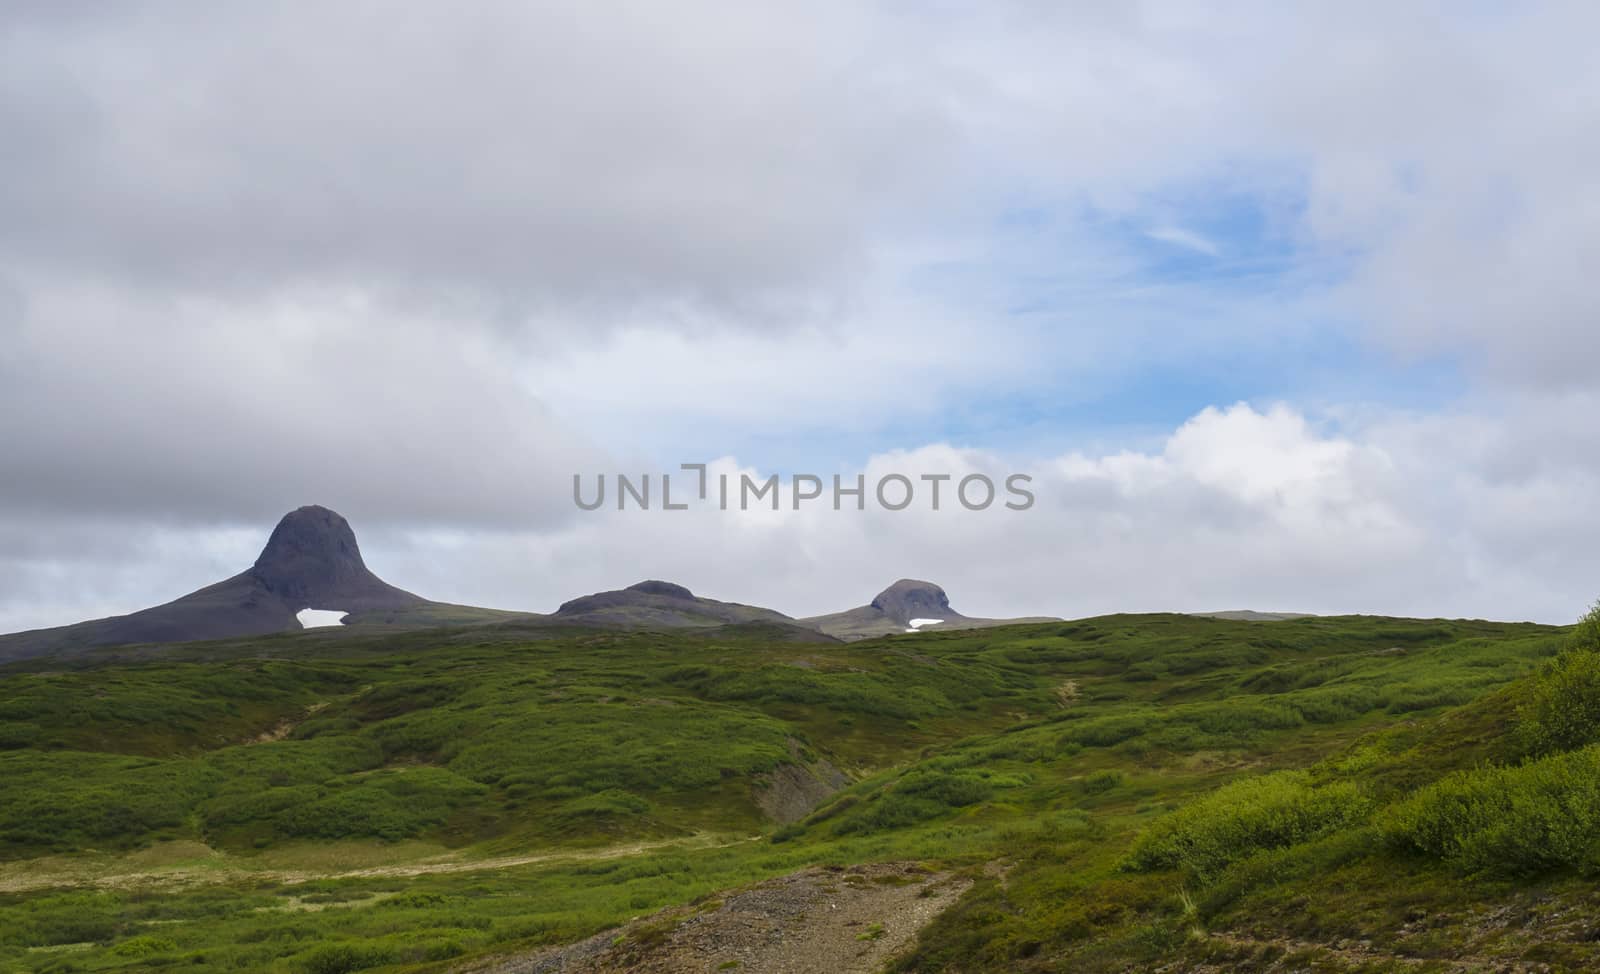 Hat shape mountains with snow capes, green hills and grass meadow, blue sky white clouds, Iceland summer